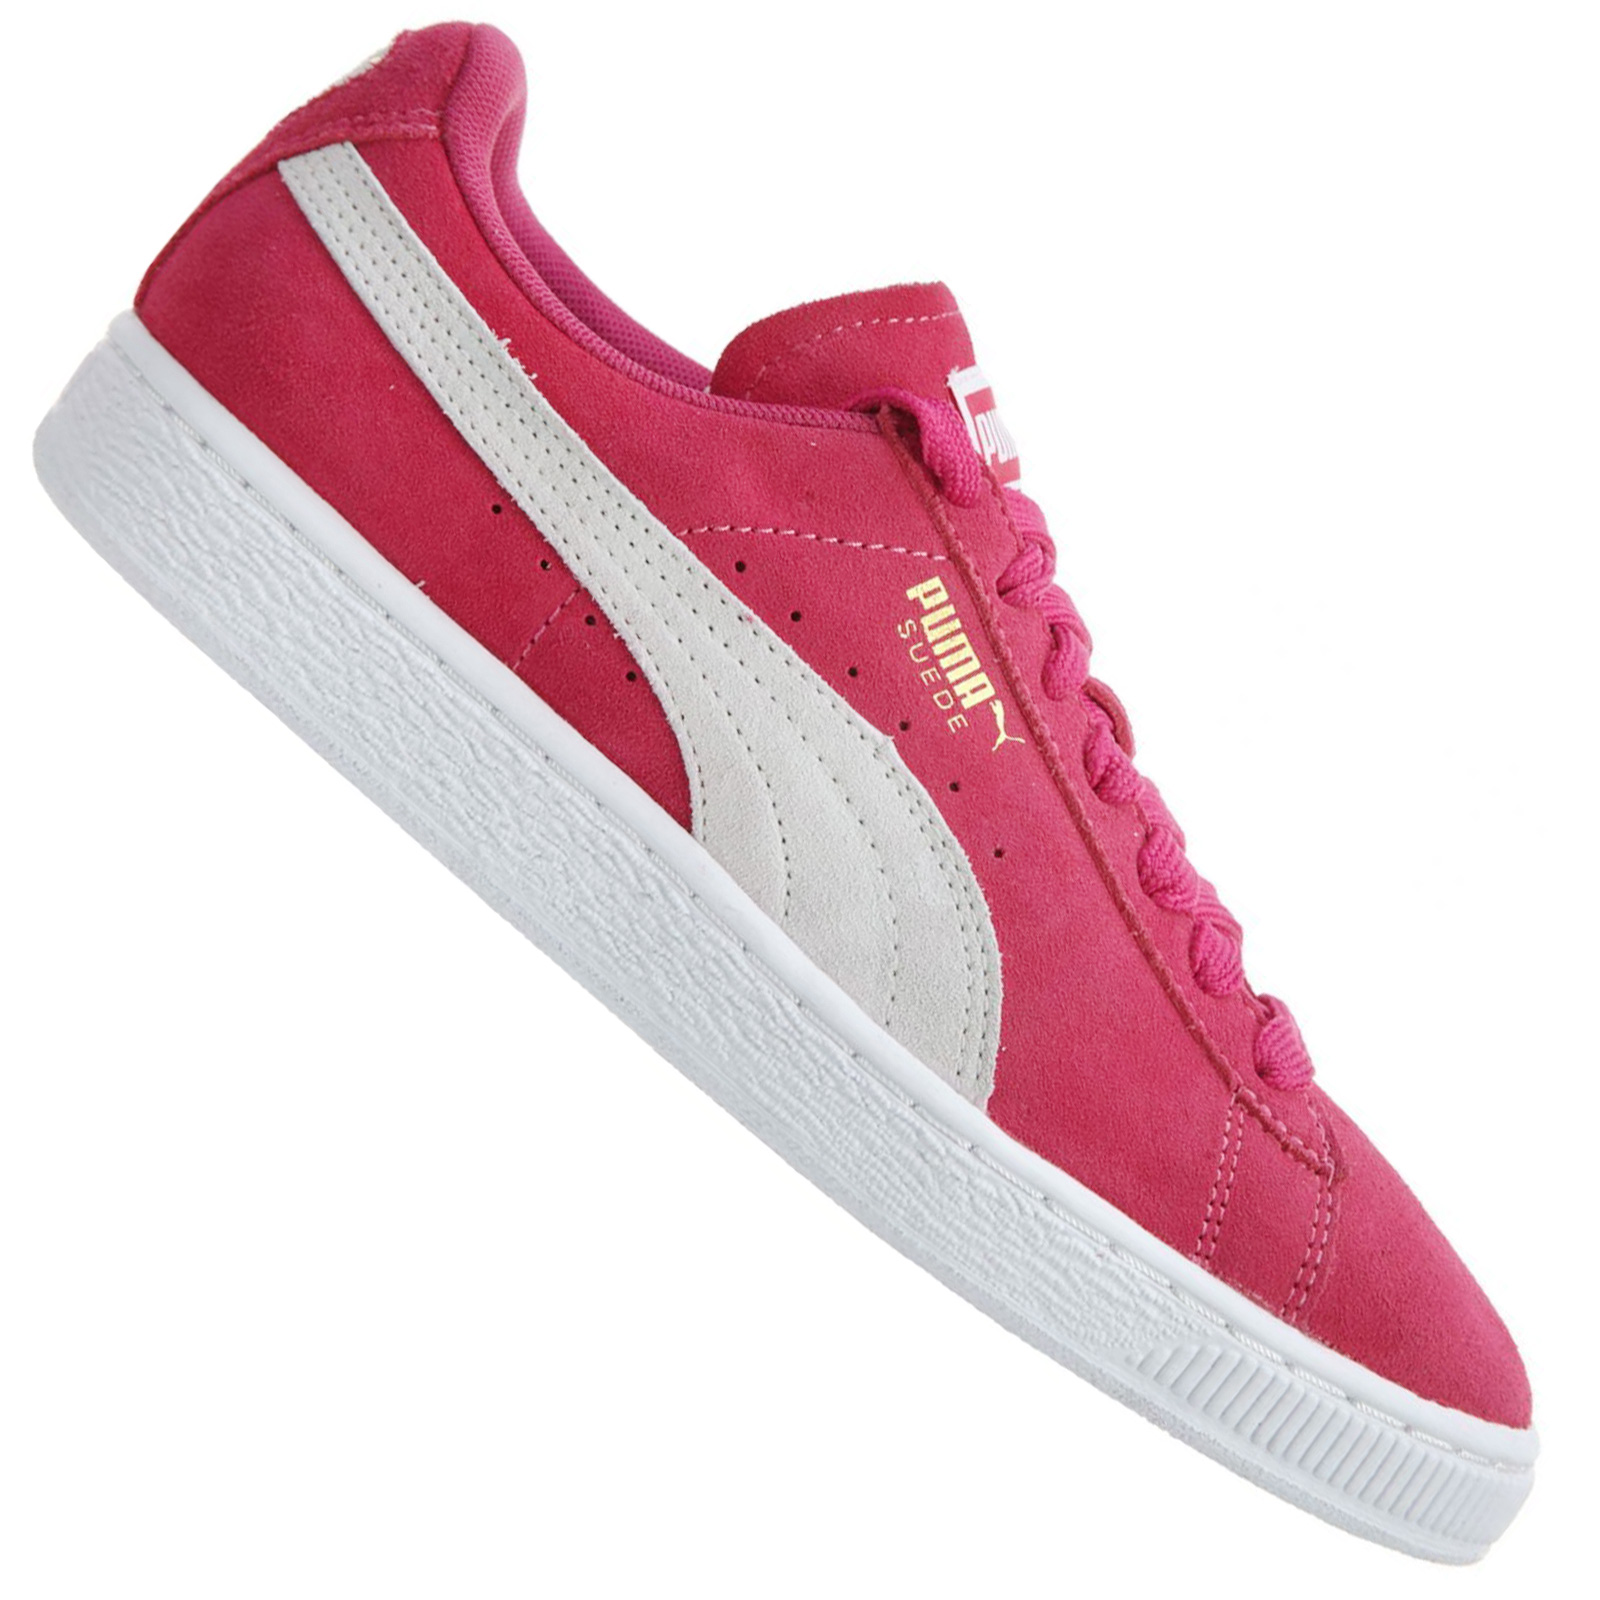 puma suede trainers pink